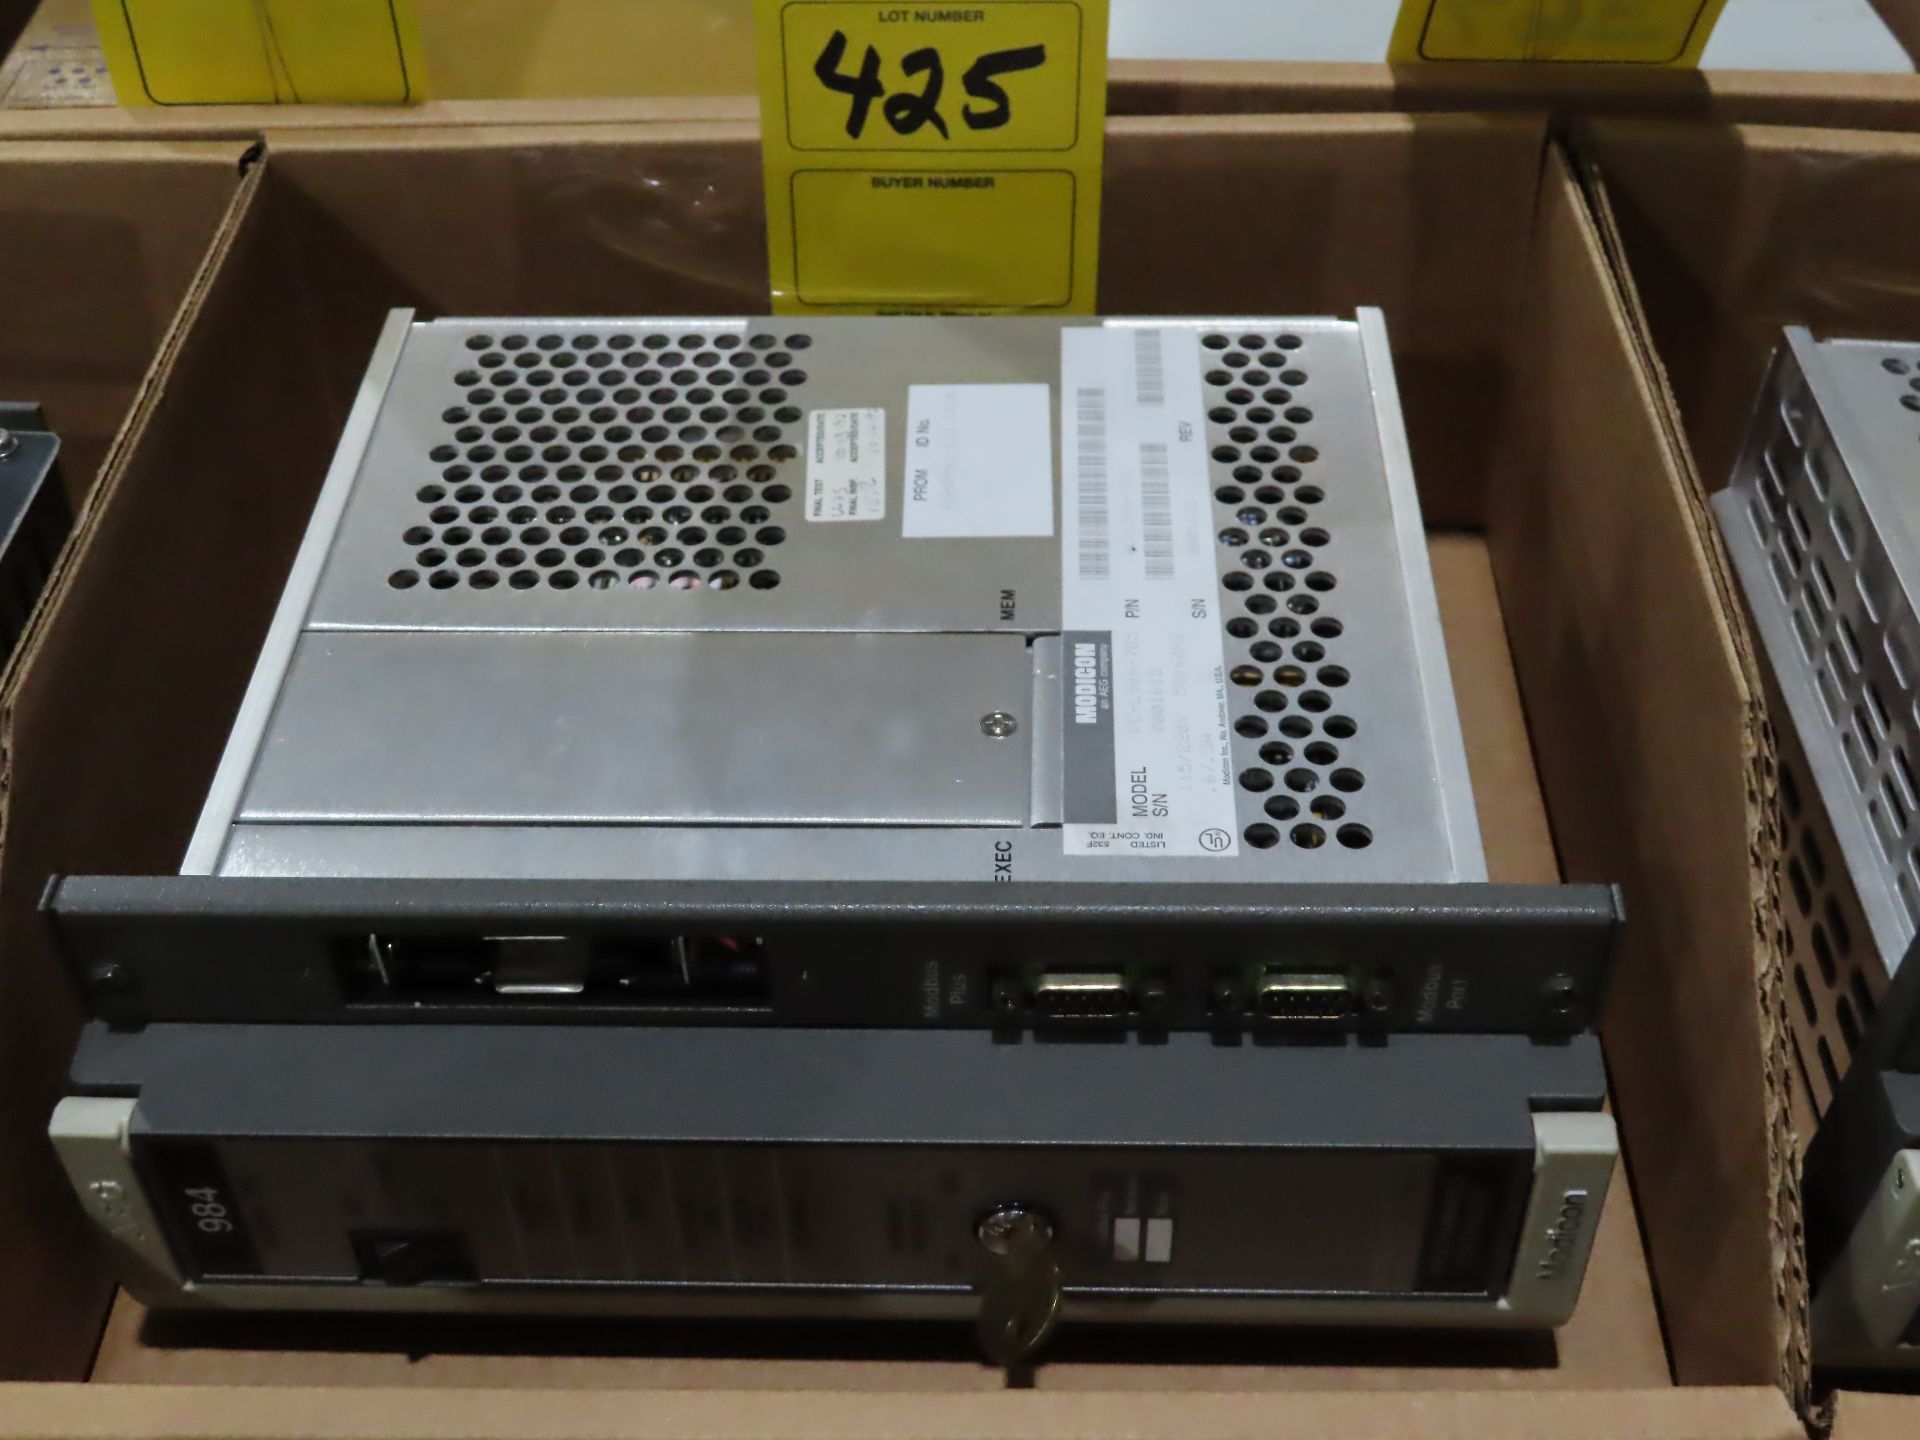 AEG modicon model PC-L984-785, as always, with Brolyn LLC auctions, all lots can be picked up from